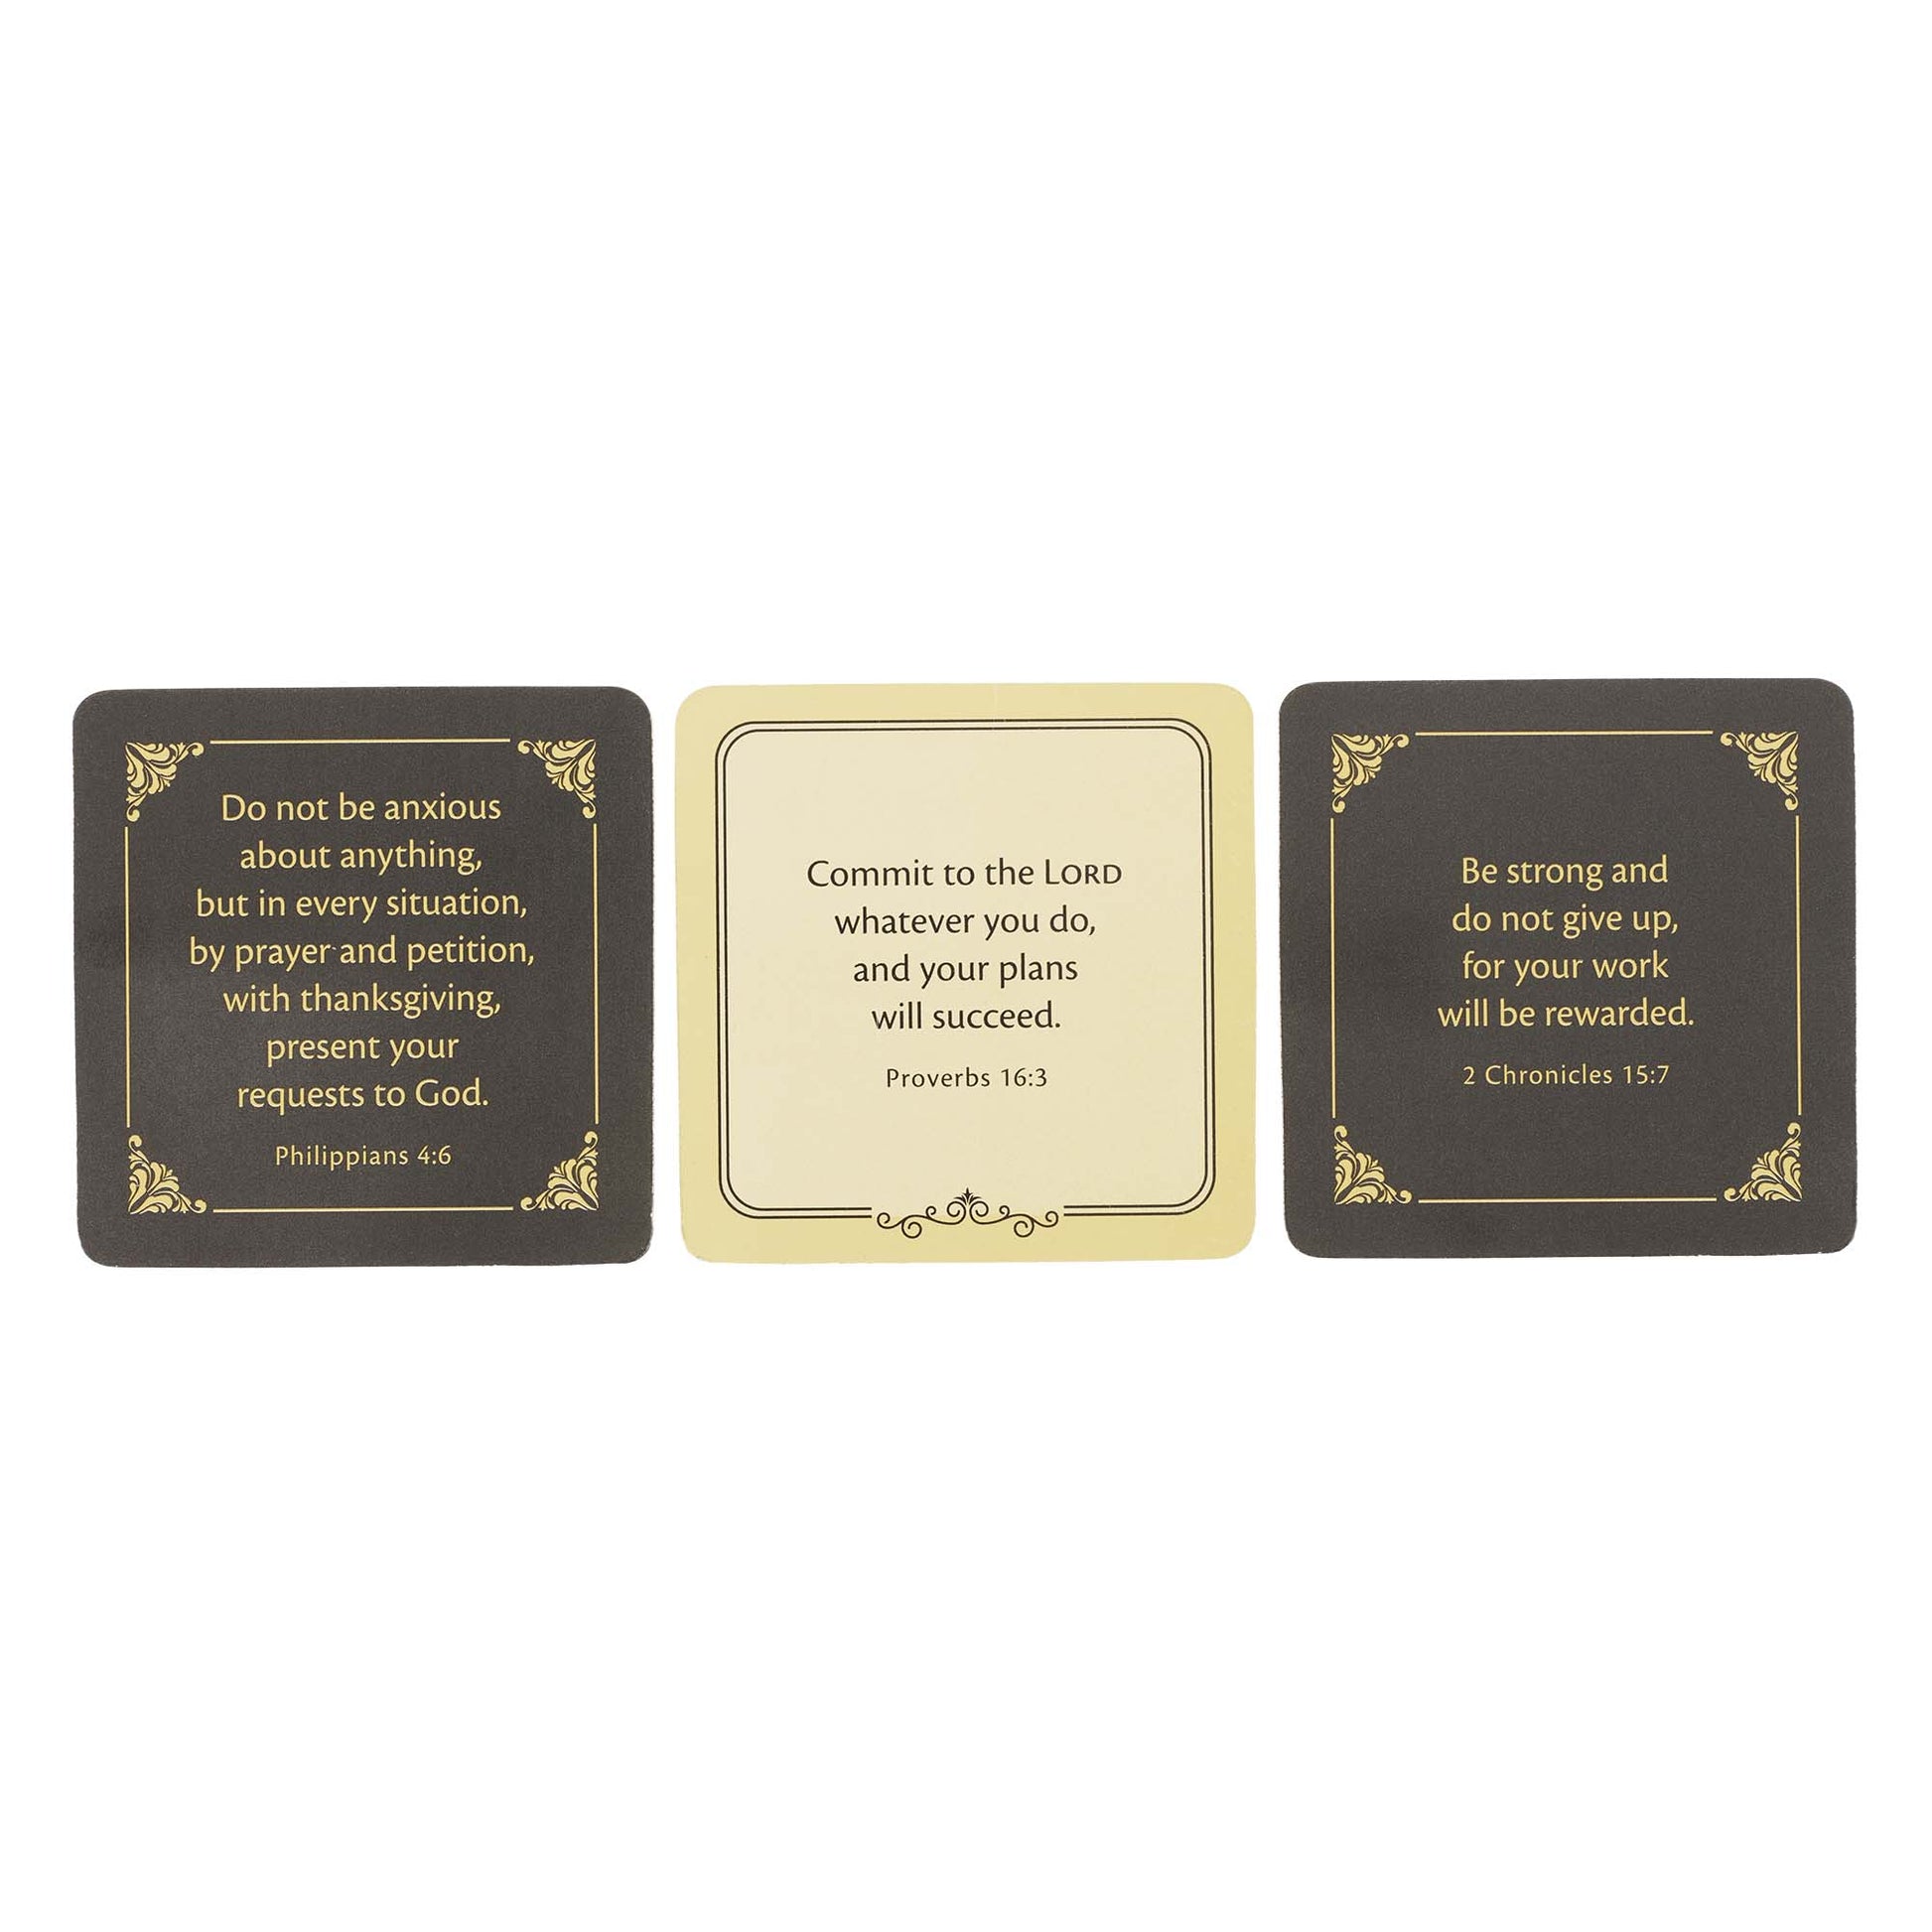 A Word for Today Scripture Cards in a Gift Tin - The Christian Gift Company